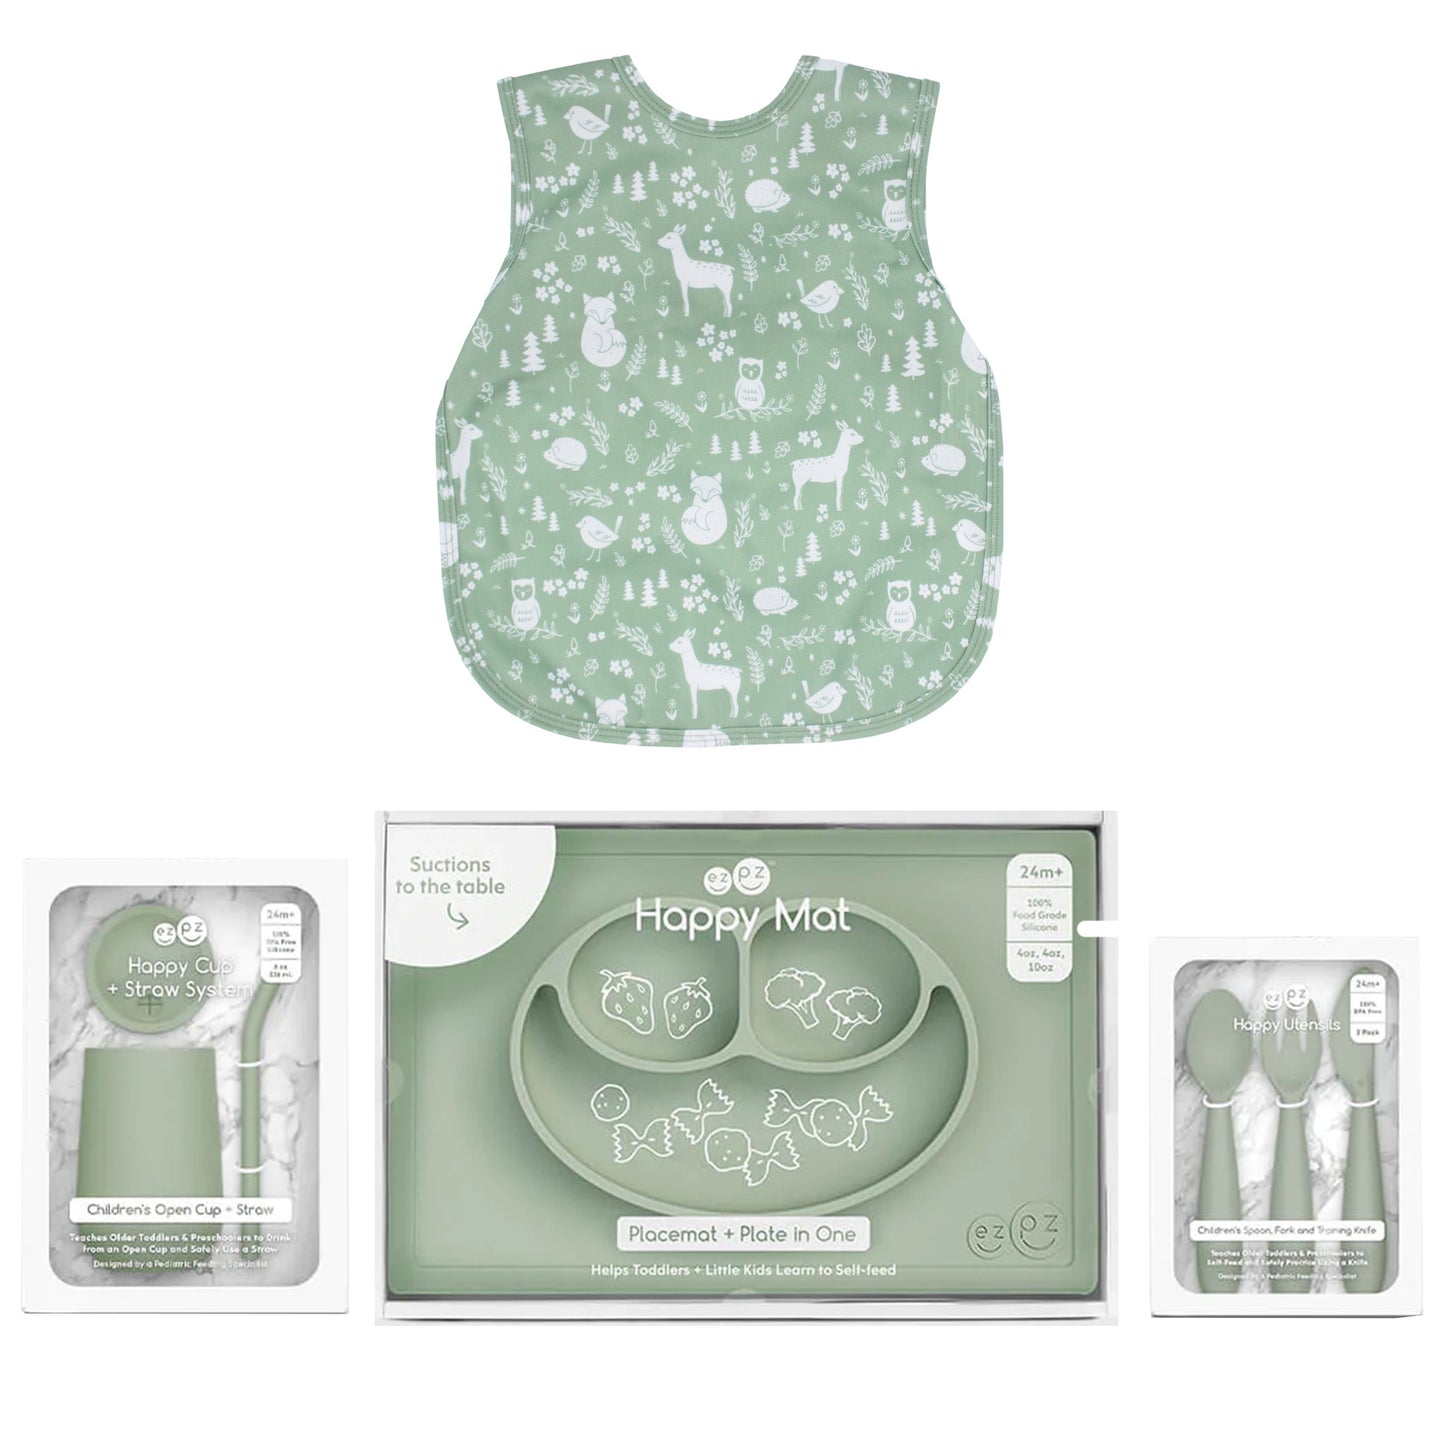 Gift Bundle Second Birthday: “Spoil the Child” for Toddler Muted